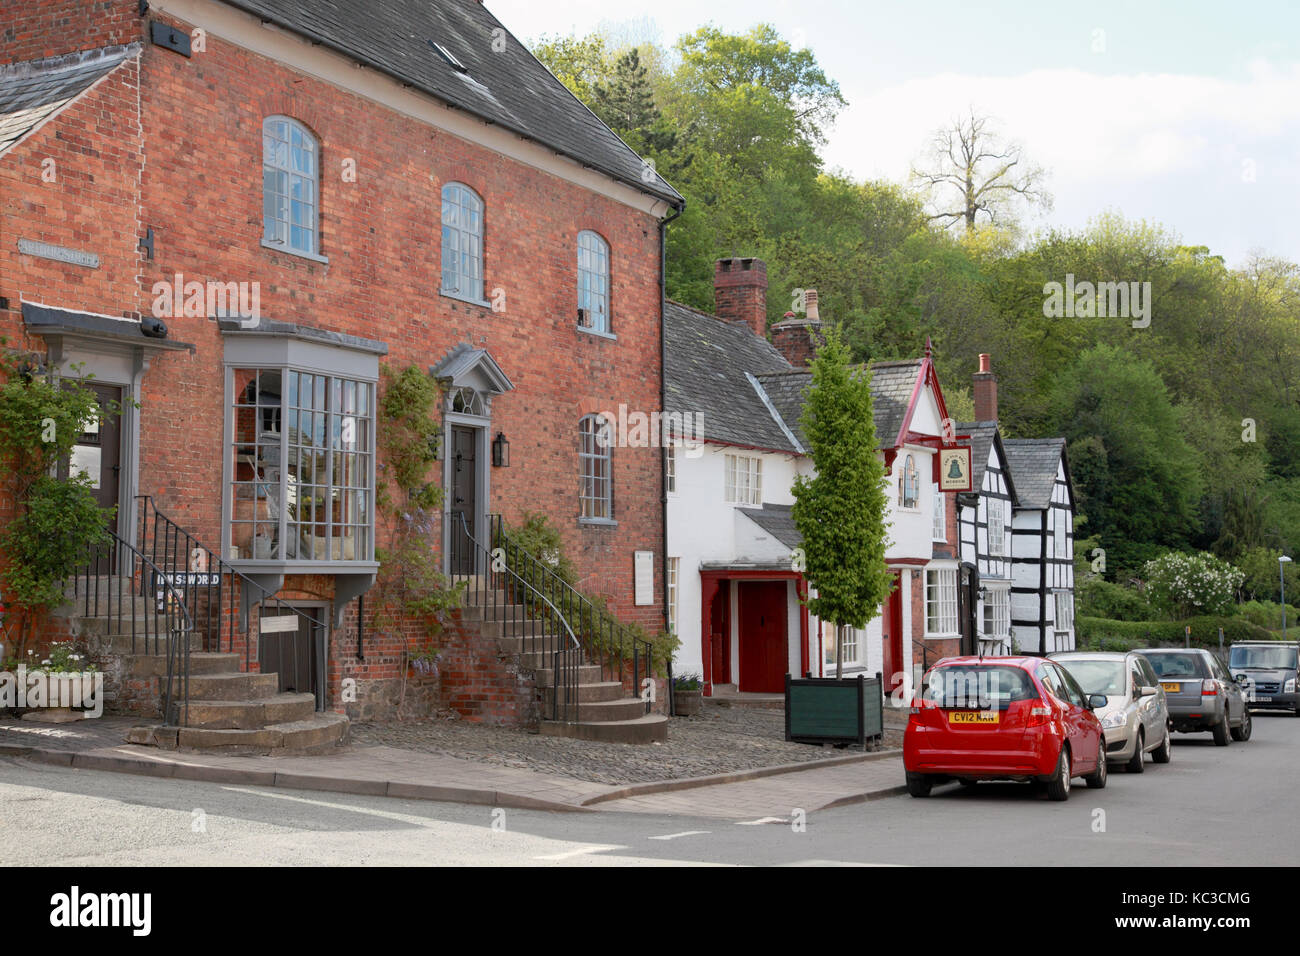 Arthur Street, Montgomery, a small town on the Welsh border amid the Shropshire hills Stock Photo